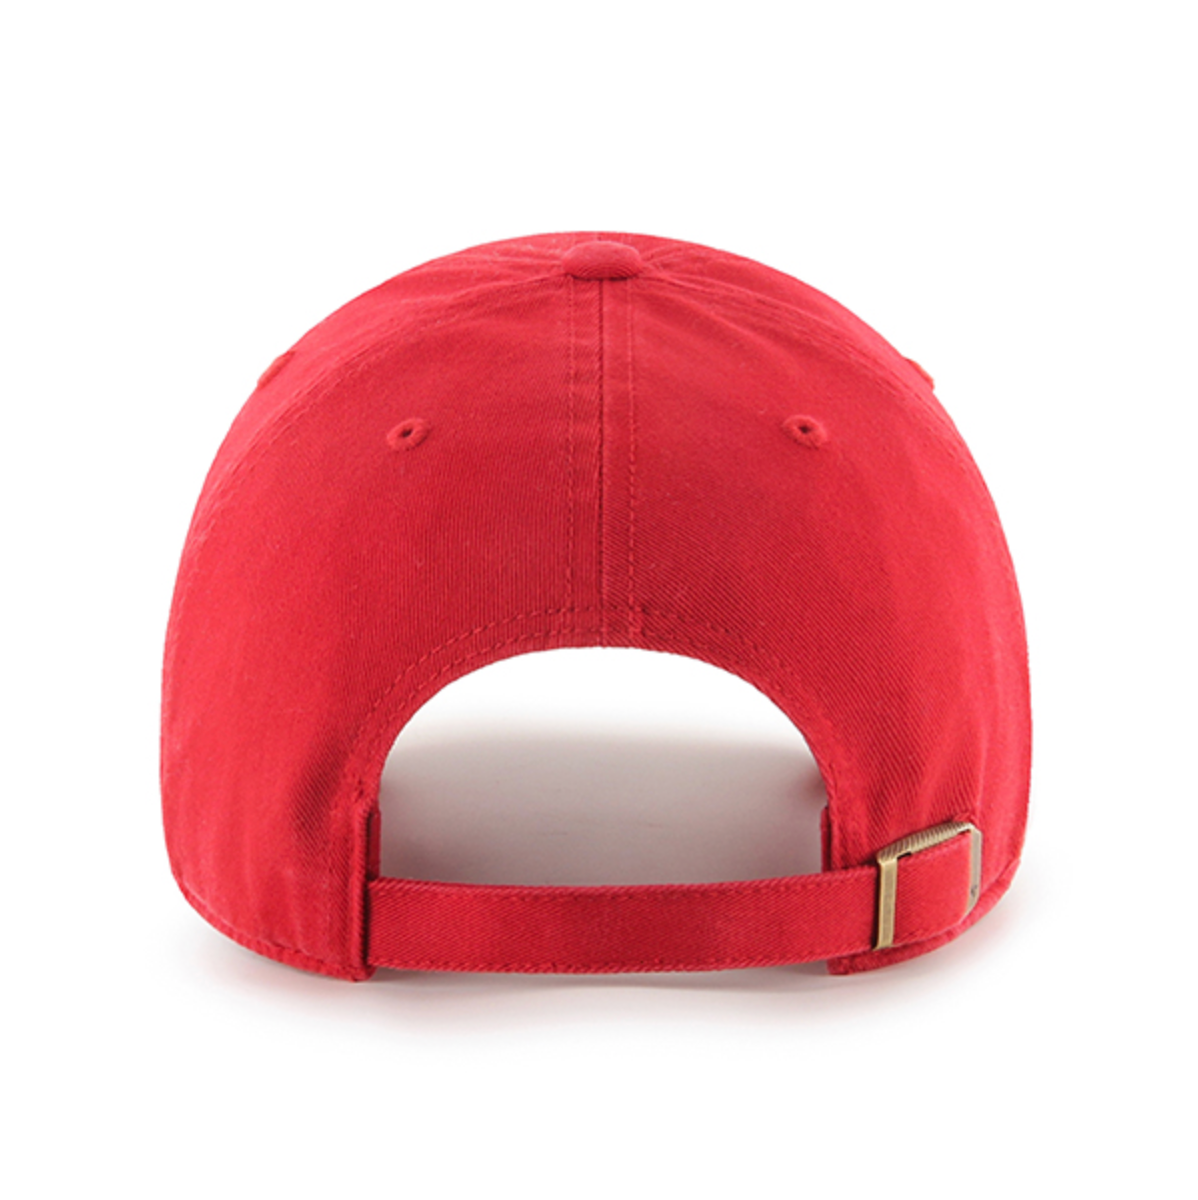 '47 Brand Liverpool FC Adjustable Clean Up Hat-Red